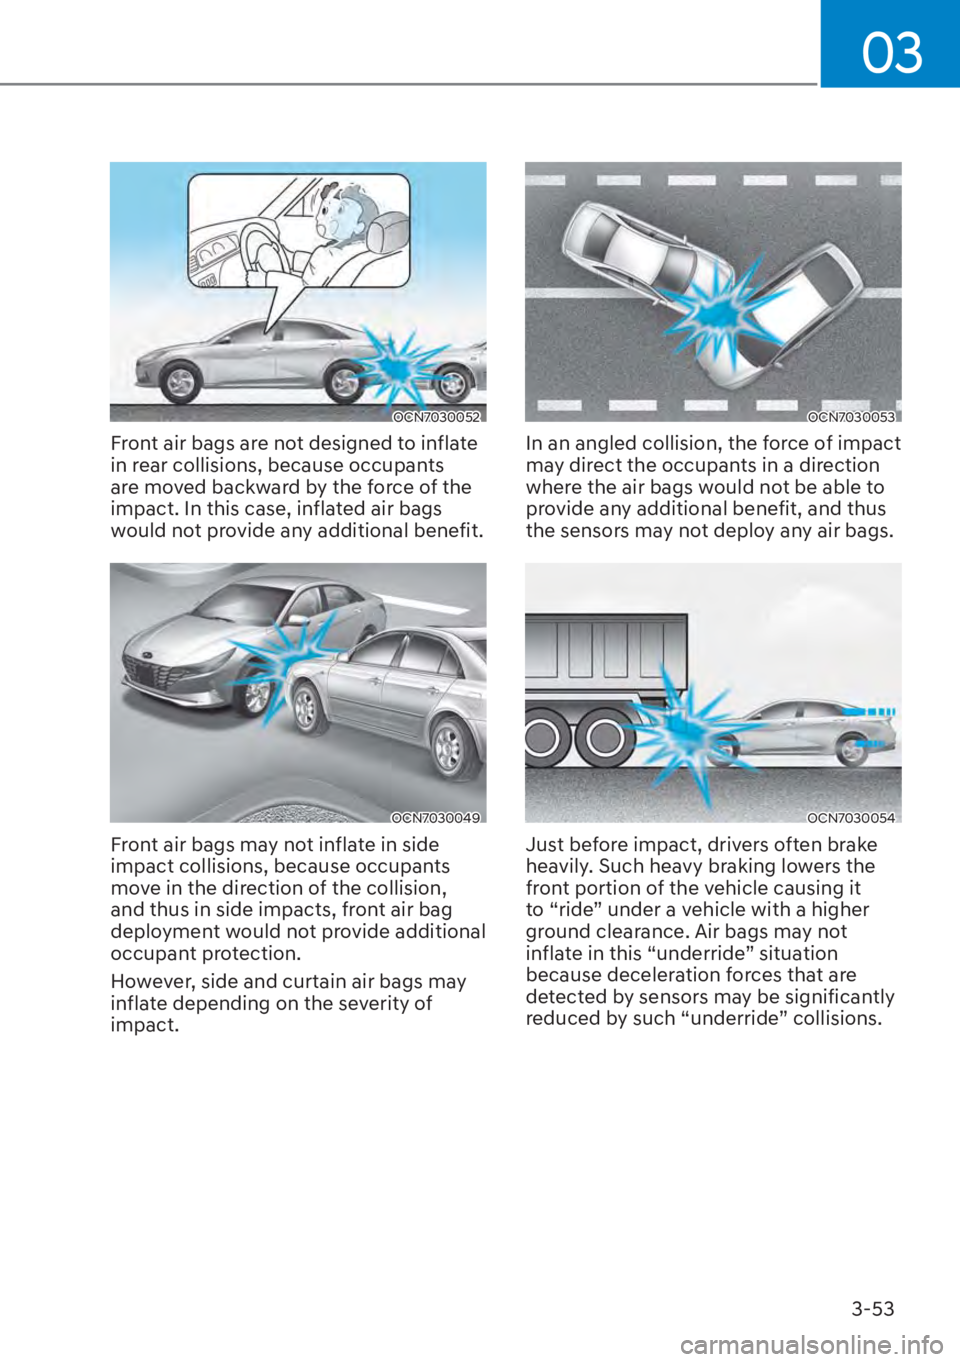 HYUNDAI ELANTRA 2023  Owners Manual 03
3-53
OCN7030052
Front air bags are not designed to inflate 
in rear collisions, because occupants 
are moved backward by the force of the 
impact. In this case, inflated air bags 
would not provide